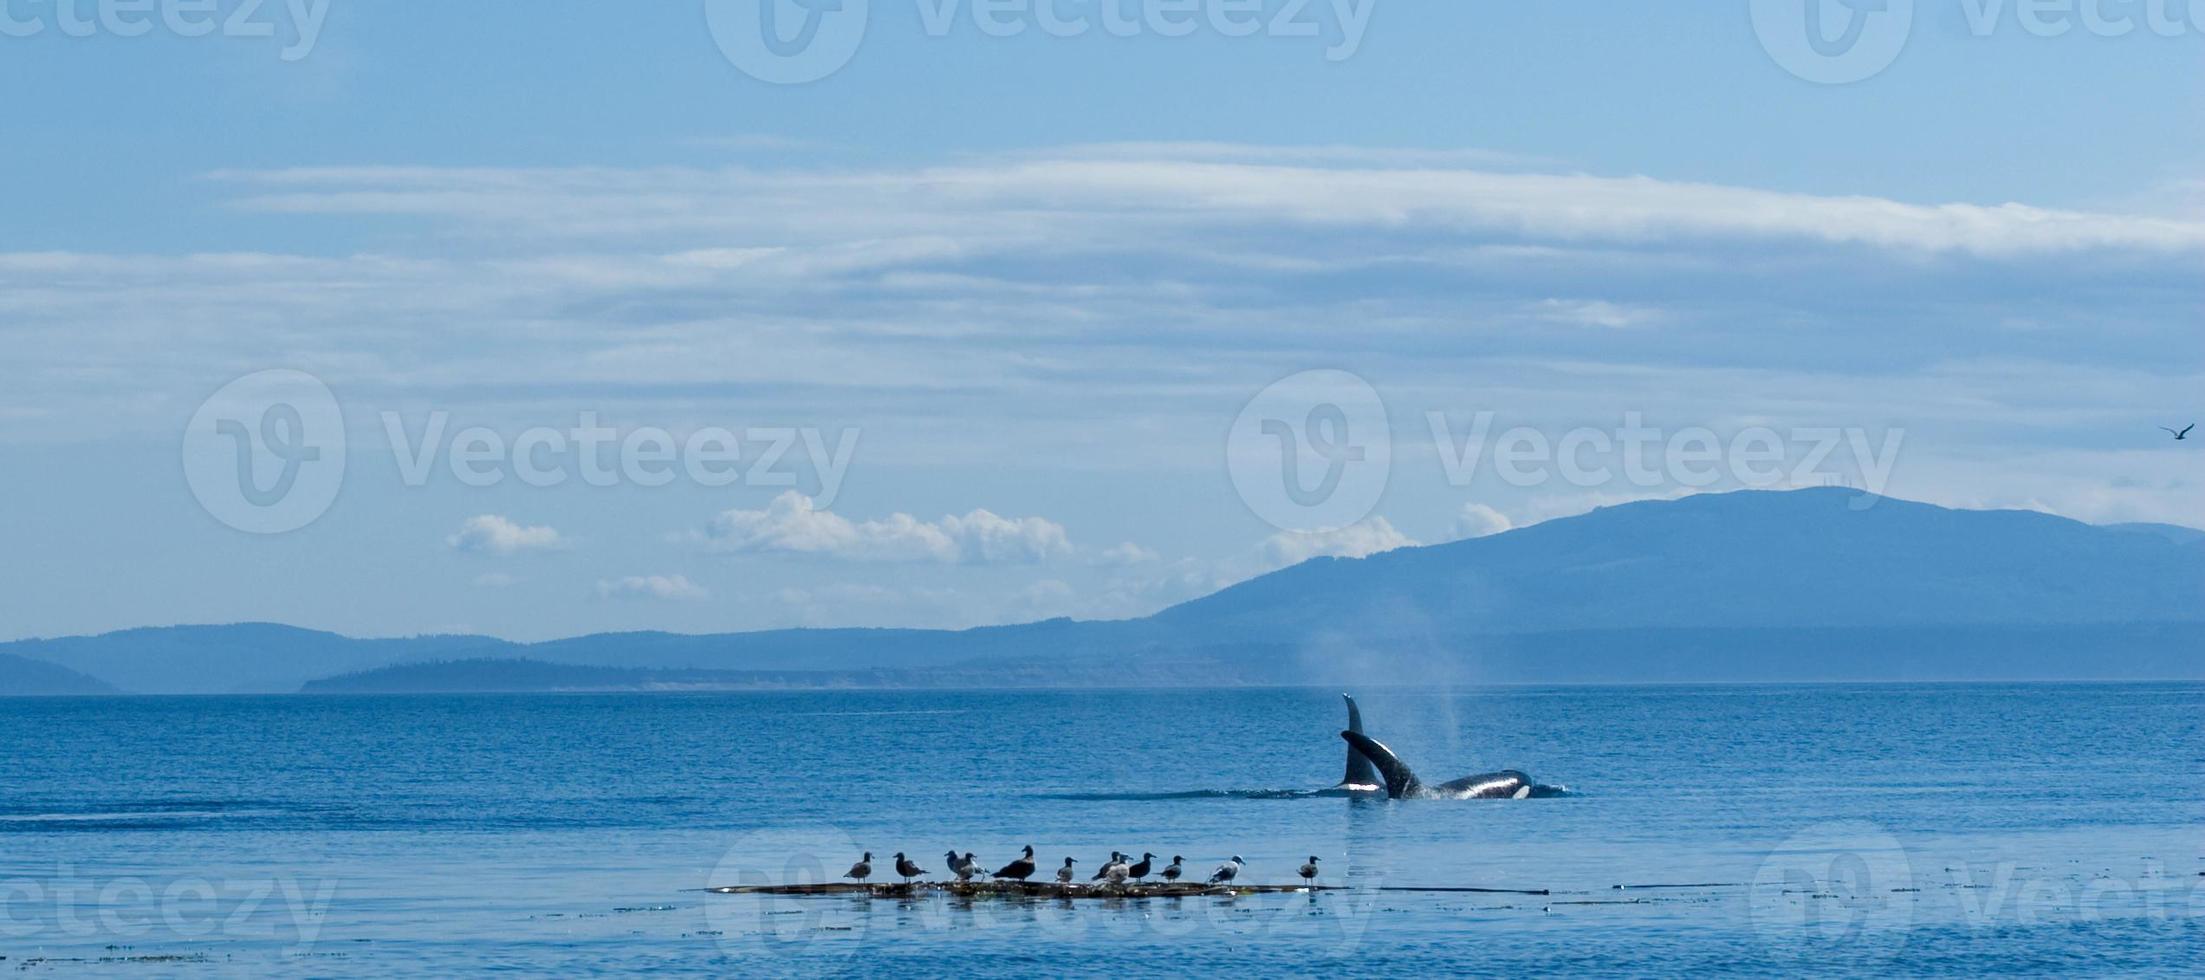 Watching the Orca's photo